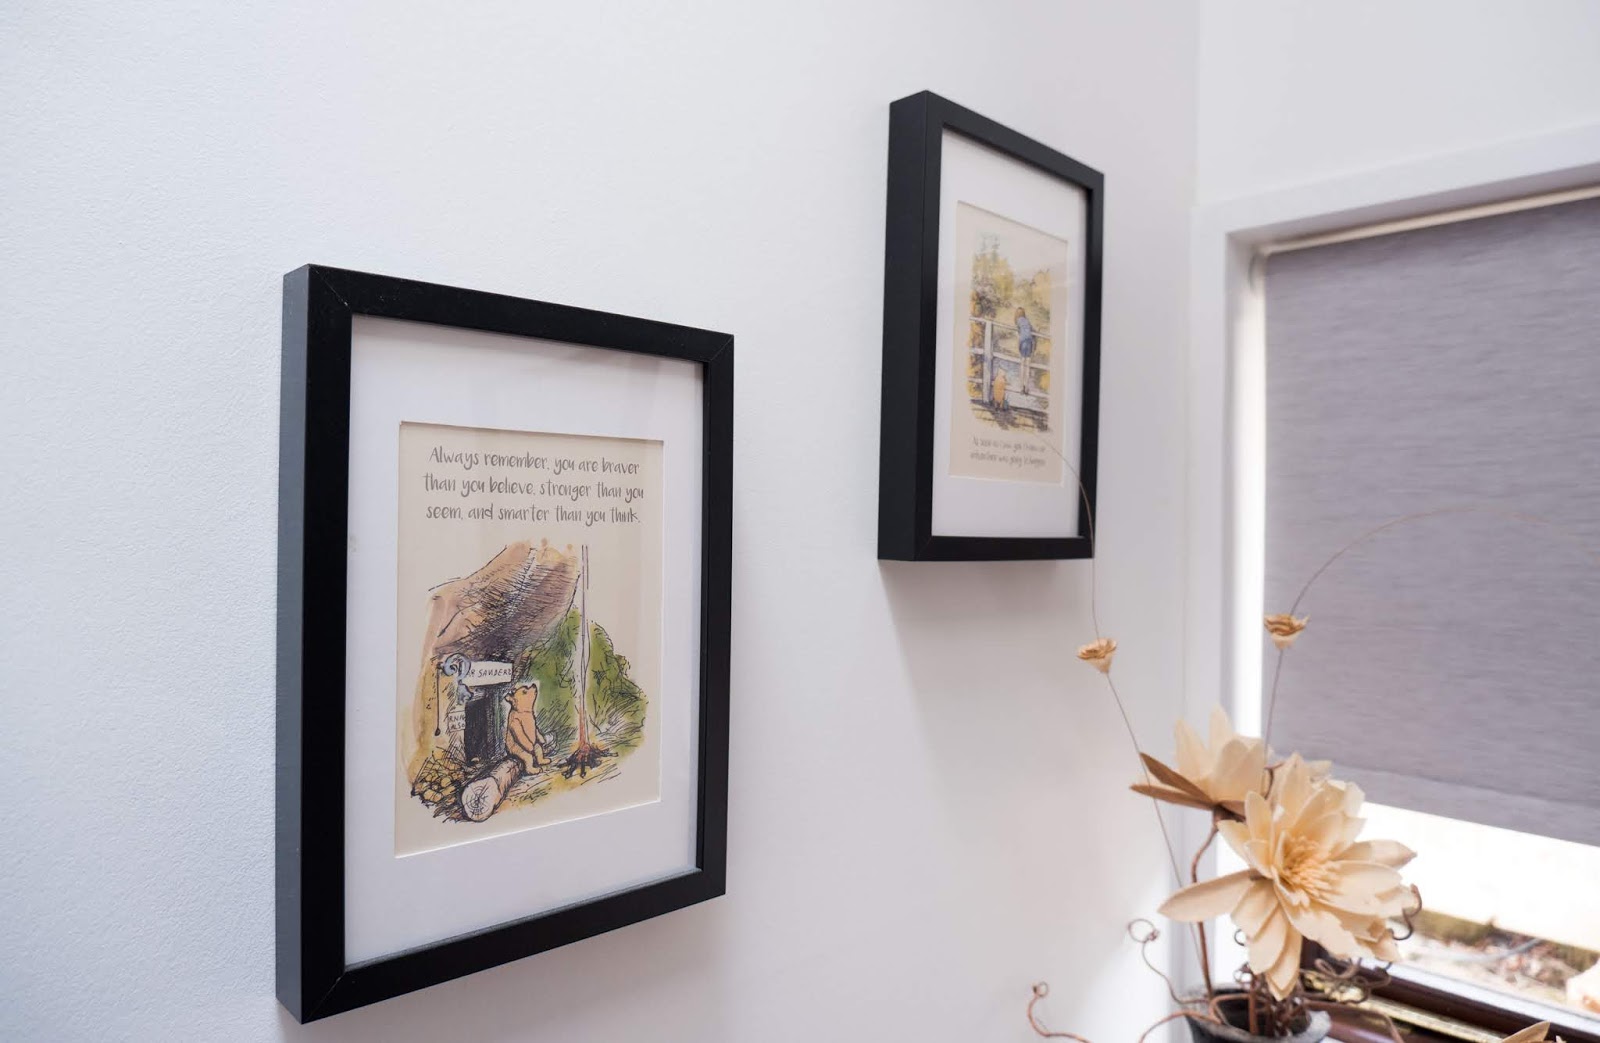 Winnie the Pooh artwork at the Hundred Acre Wood studio